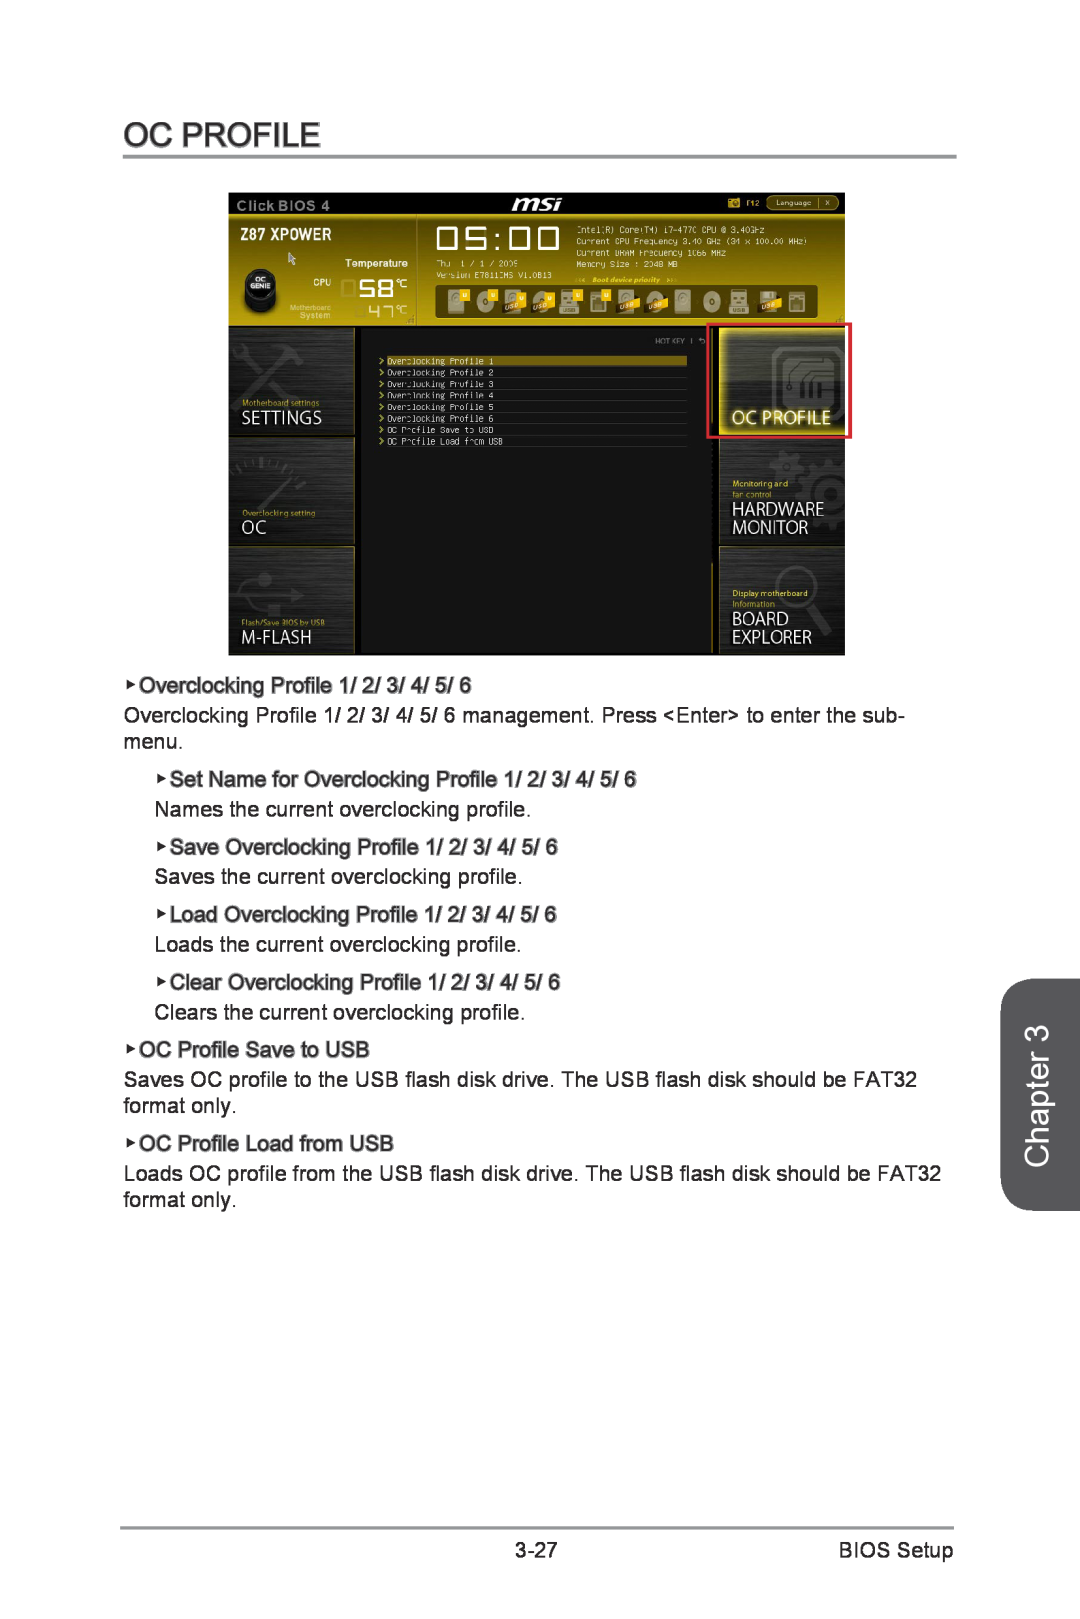 MSI Z87-XPOWER manual Oc Profile, Chapter 